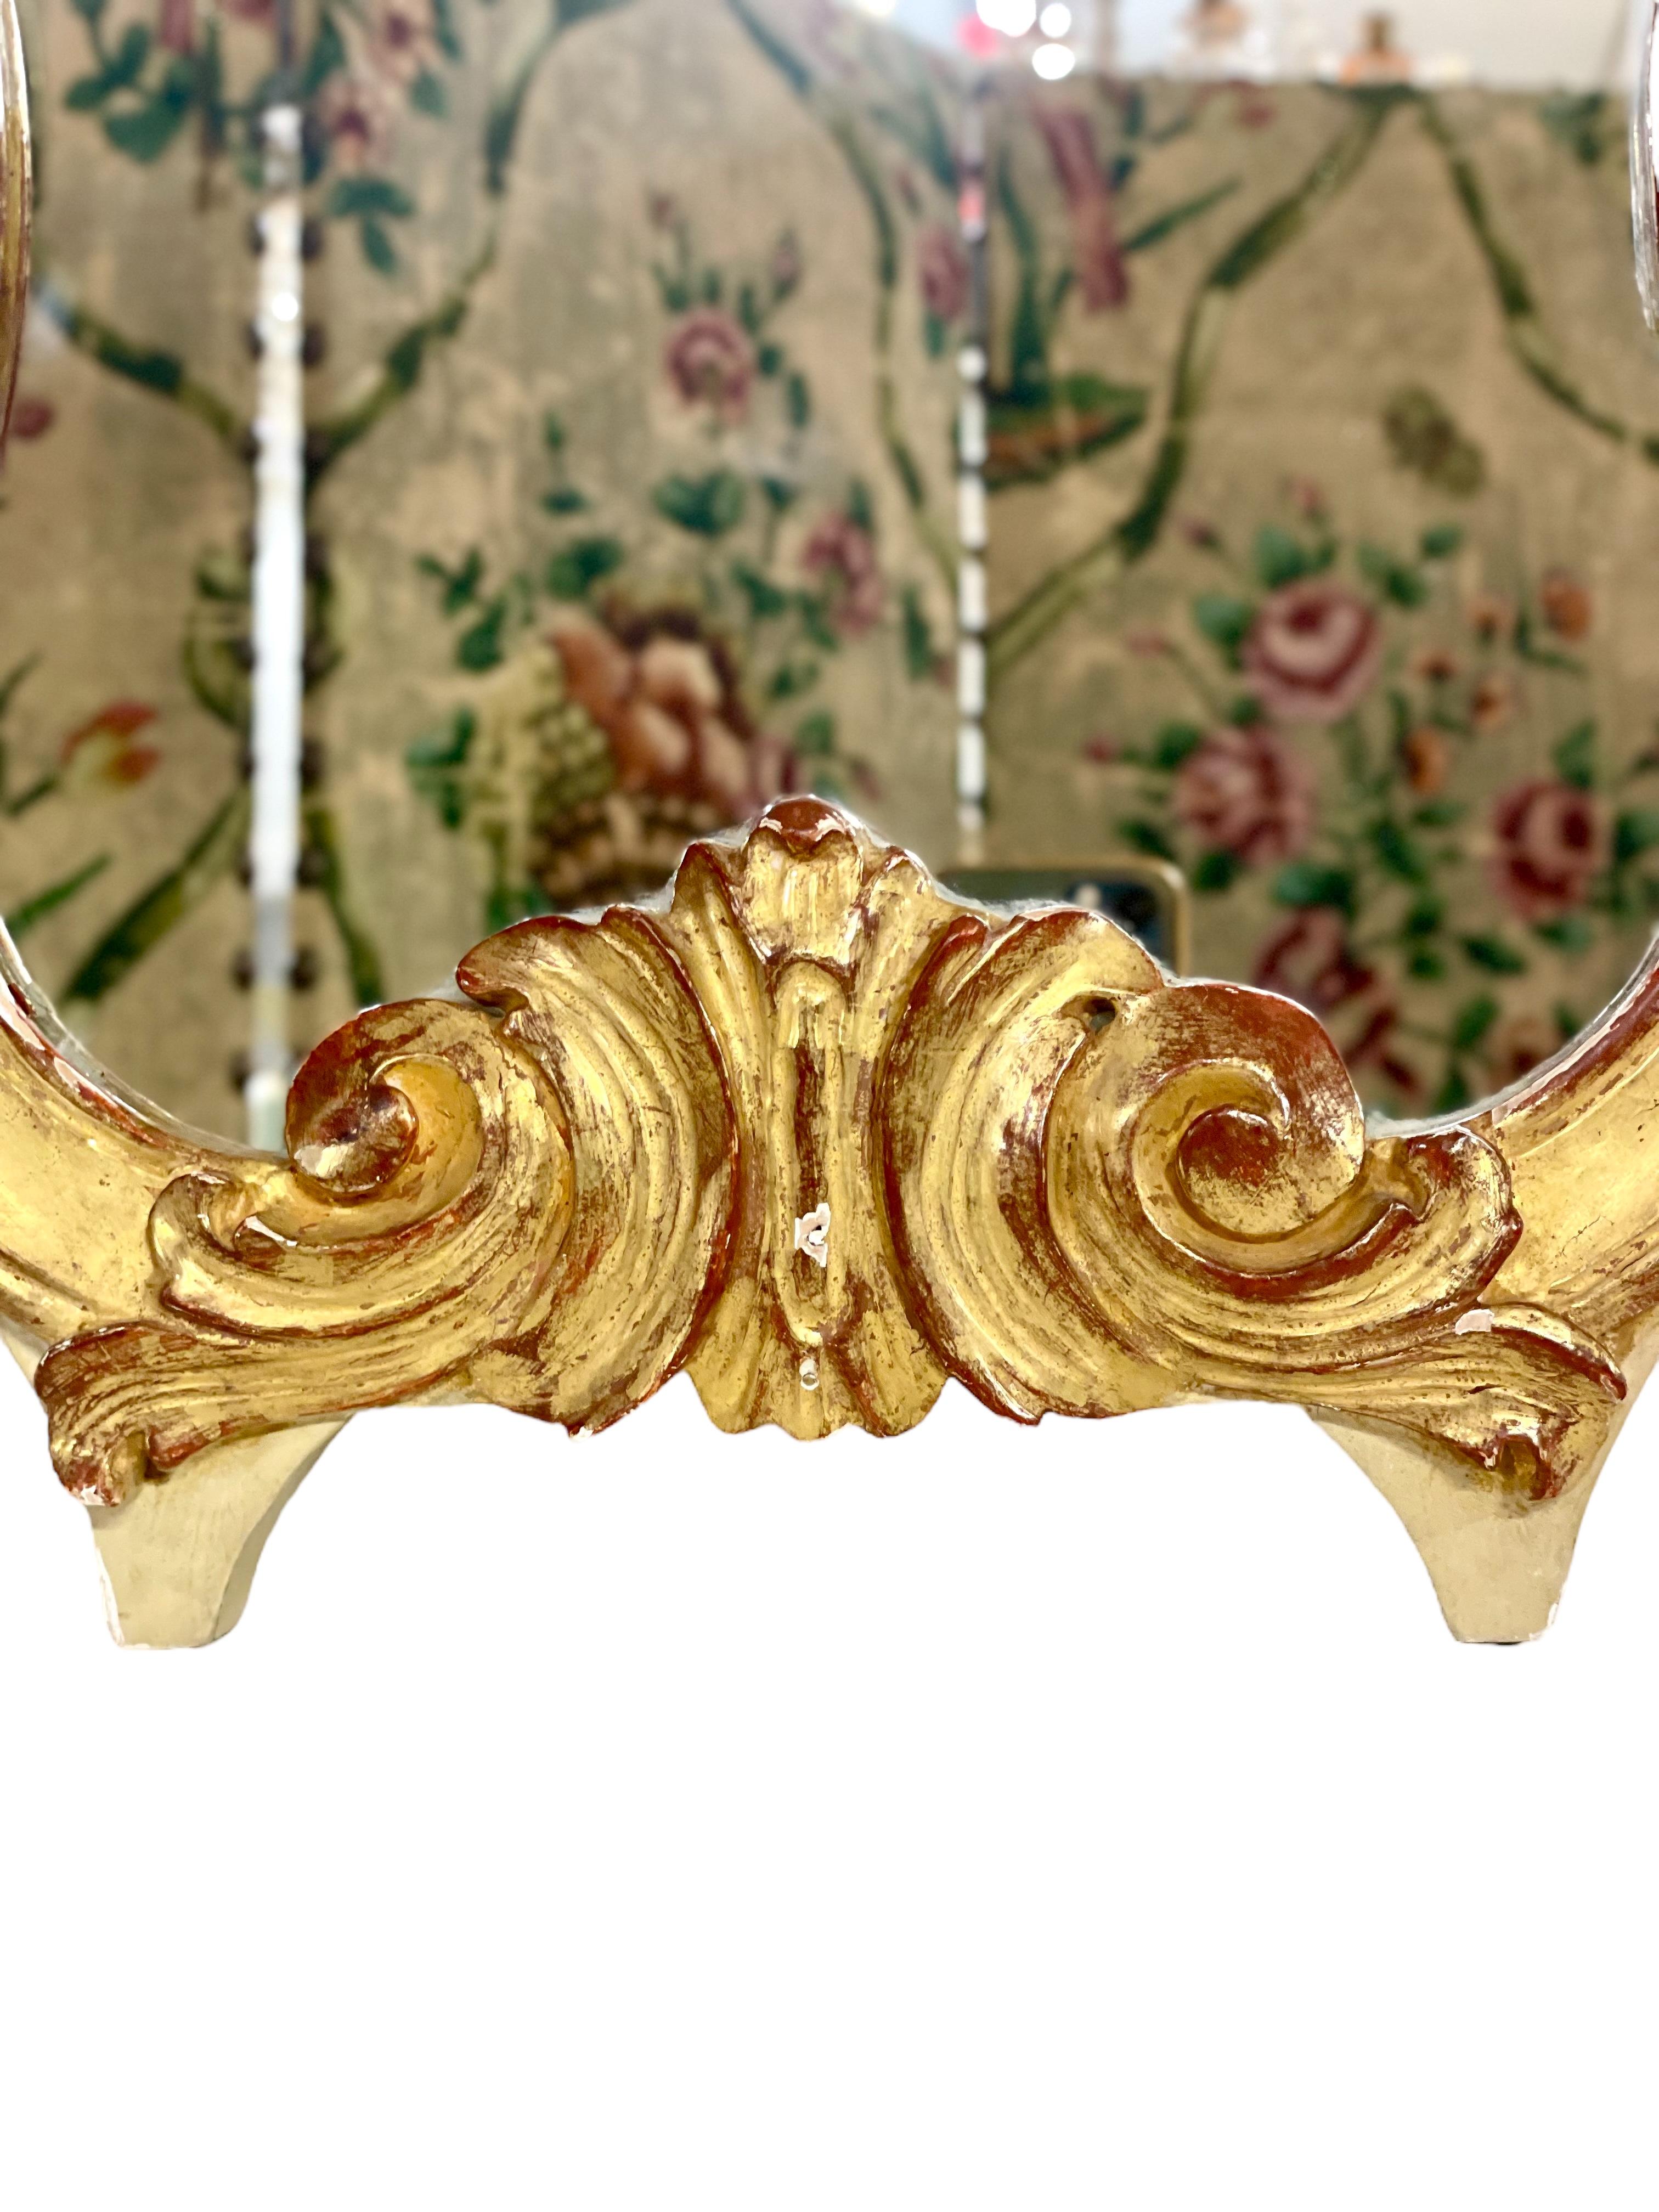 An exquisite violin-shaped Rococo-style wall mirror in hand-carved and gilded wood, with a beautiful stylised shell at its crest and swirling acanthus scrolls cascading down each shoulder, and at its base. Echoing the exuberant styling of the 18th